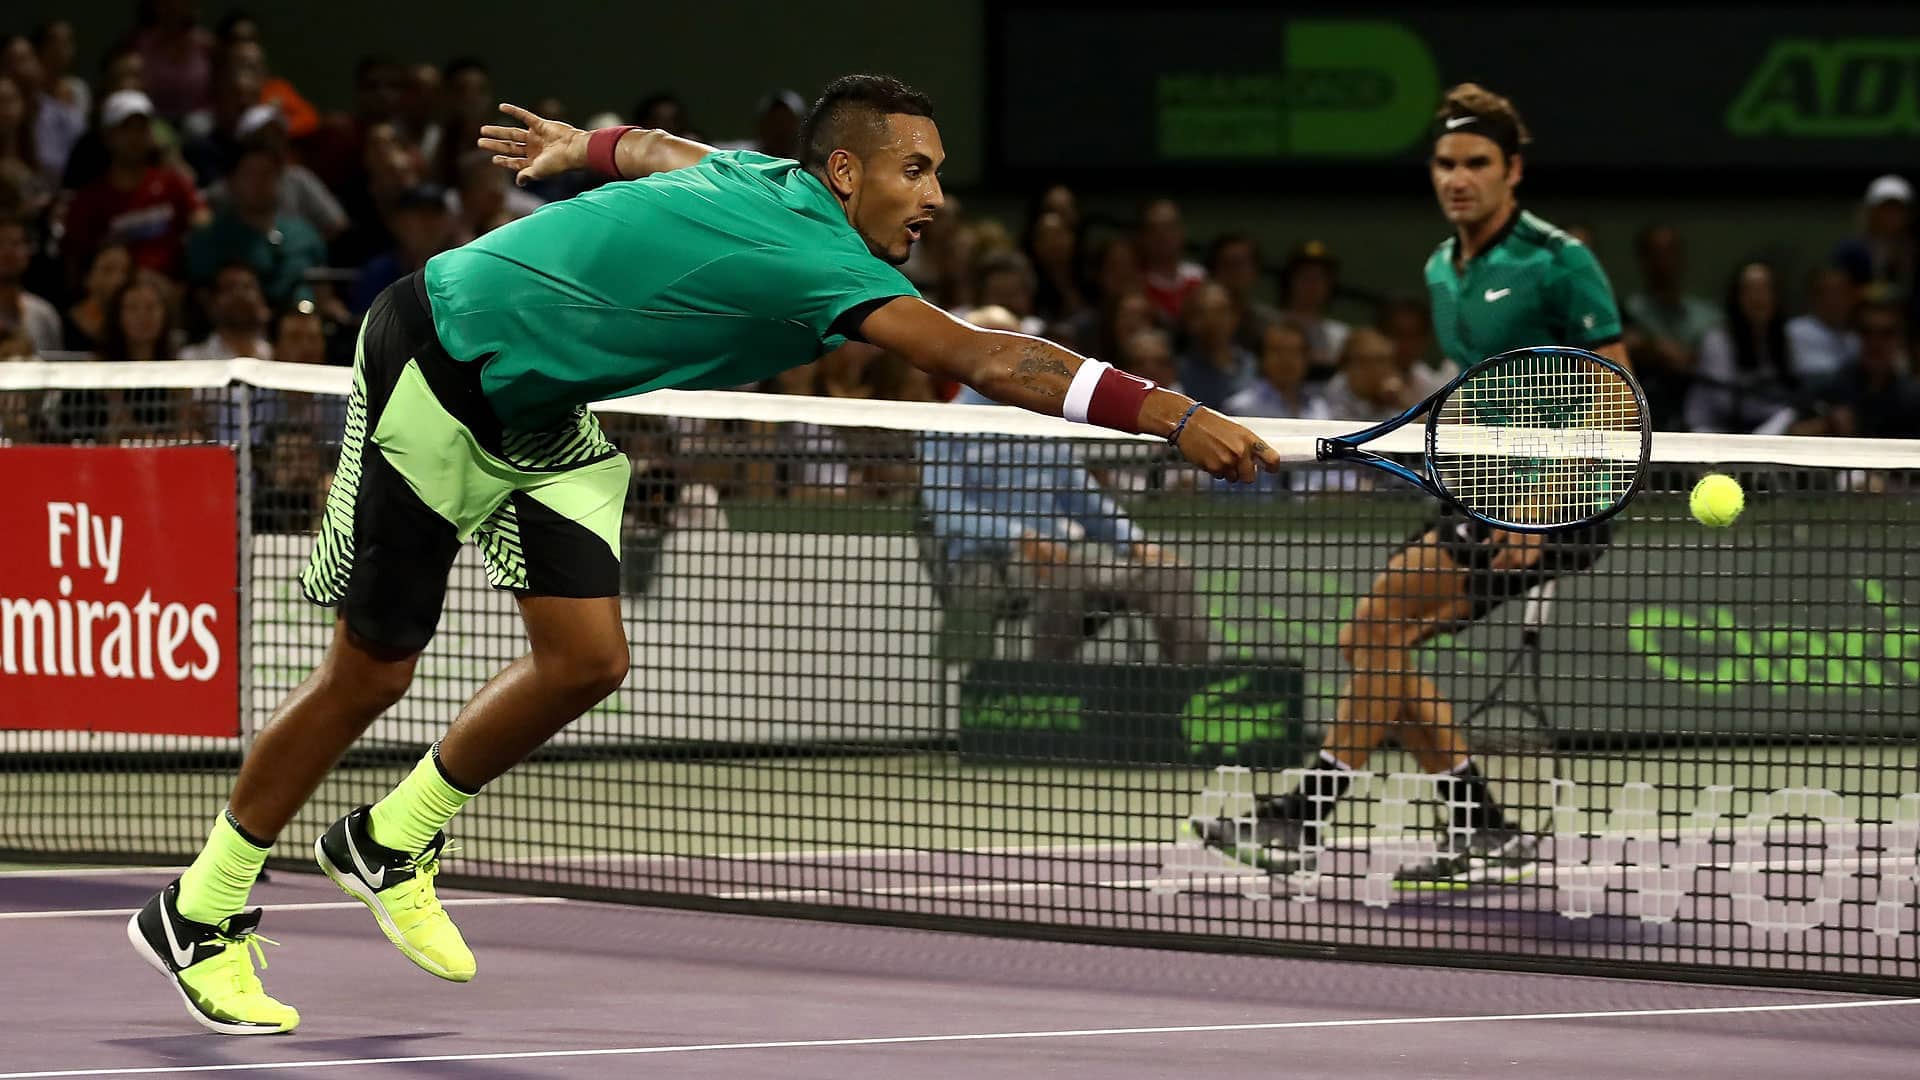 Roger Federer and Nick Kyrgios left it all on the court in their thrilling semi-final clash in Miami.